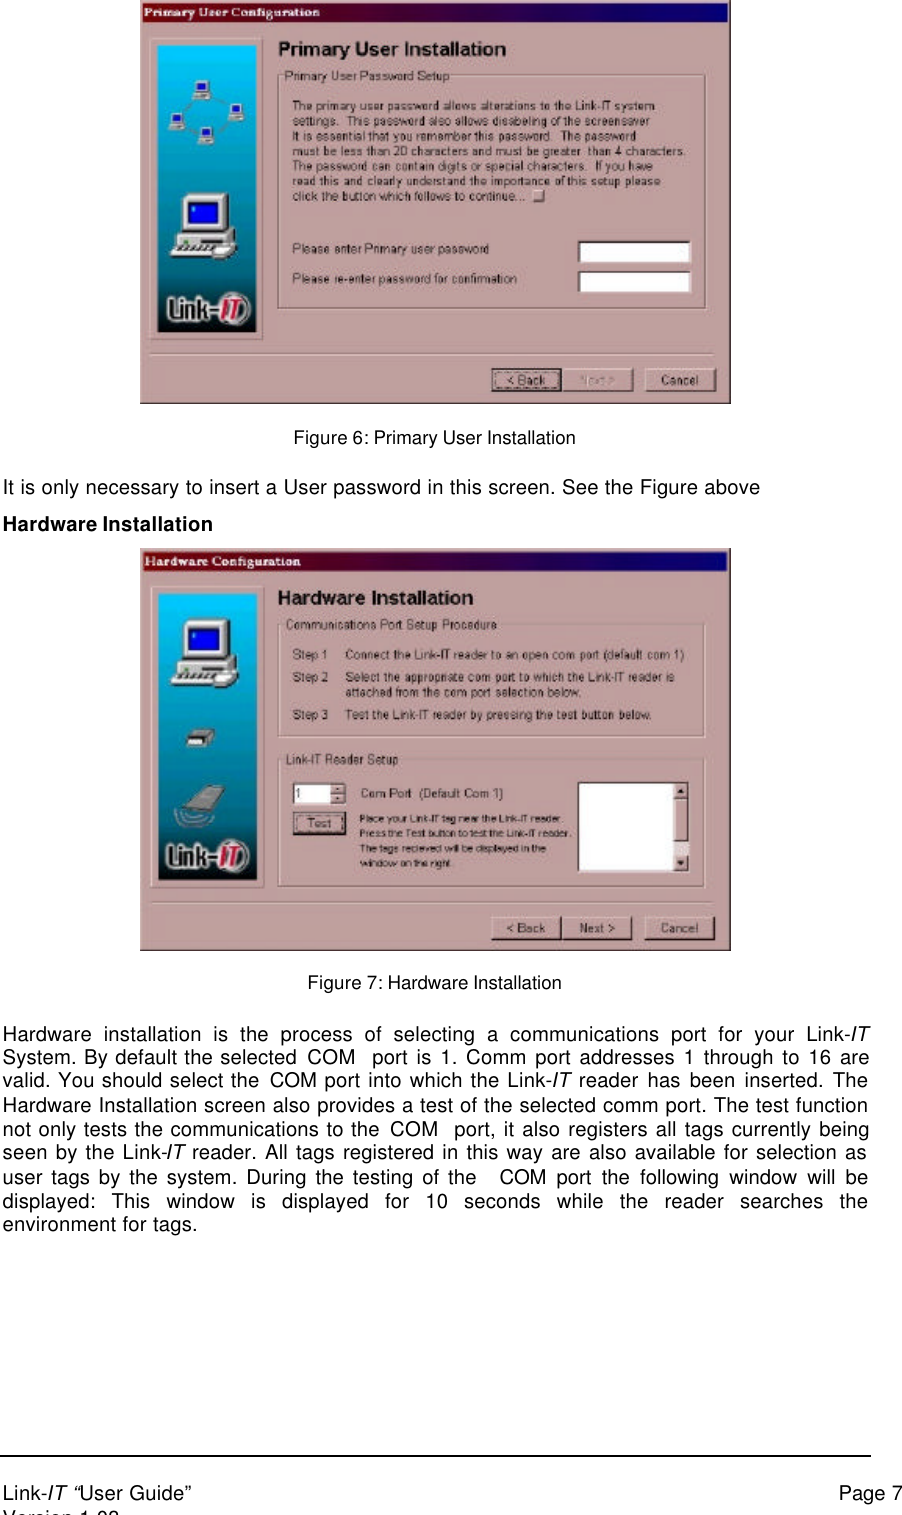 Link-IT “User Guide” Page 7Version 1.03Figure 6: Primary User InstallationIt is only necessary to insert a User password in this screen. See the Figure aboveHardware InstallationFigure 7: Hardware InstallationHardware installation is the process of selecting a communications port for your Link-ITSystem. By default the selected COM  port is 1. Comm port addresses 1 through to 16 arevalid. You should select the COM port into which the Link-IT reader has been inserted. TheHardware Installation screen also provides a test of the selected comm port. The test functionnot only tests the communications to the COM  port, it also registers all tags currently beingseen by the Link-IT reader. All tags registered in this way are also available for selection asuser tags by the system. During the testing of the   COM port the following window will bedisplayed: This window is displayed for 10 seconds while the reader searches theenvironment for tags.